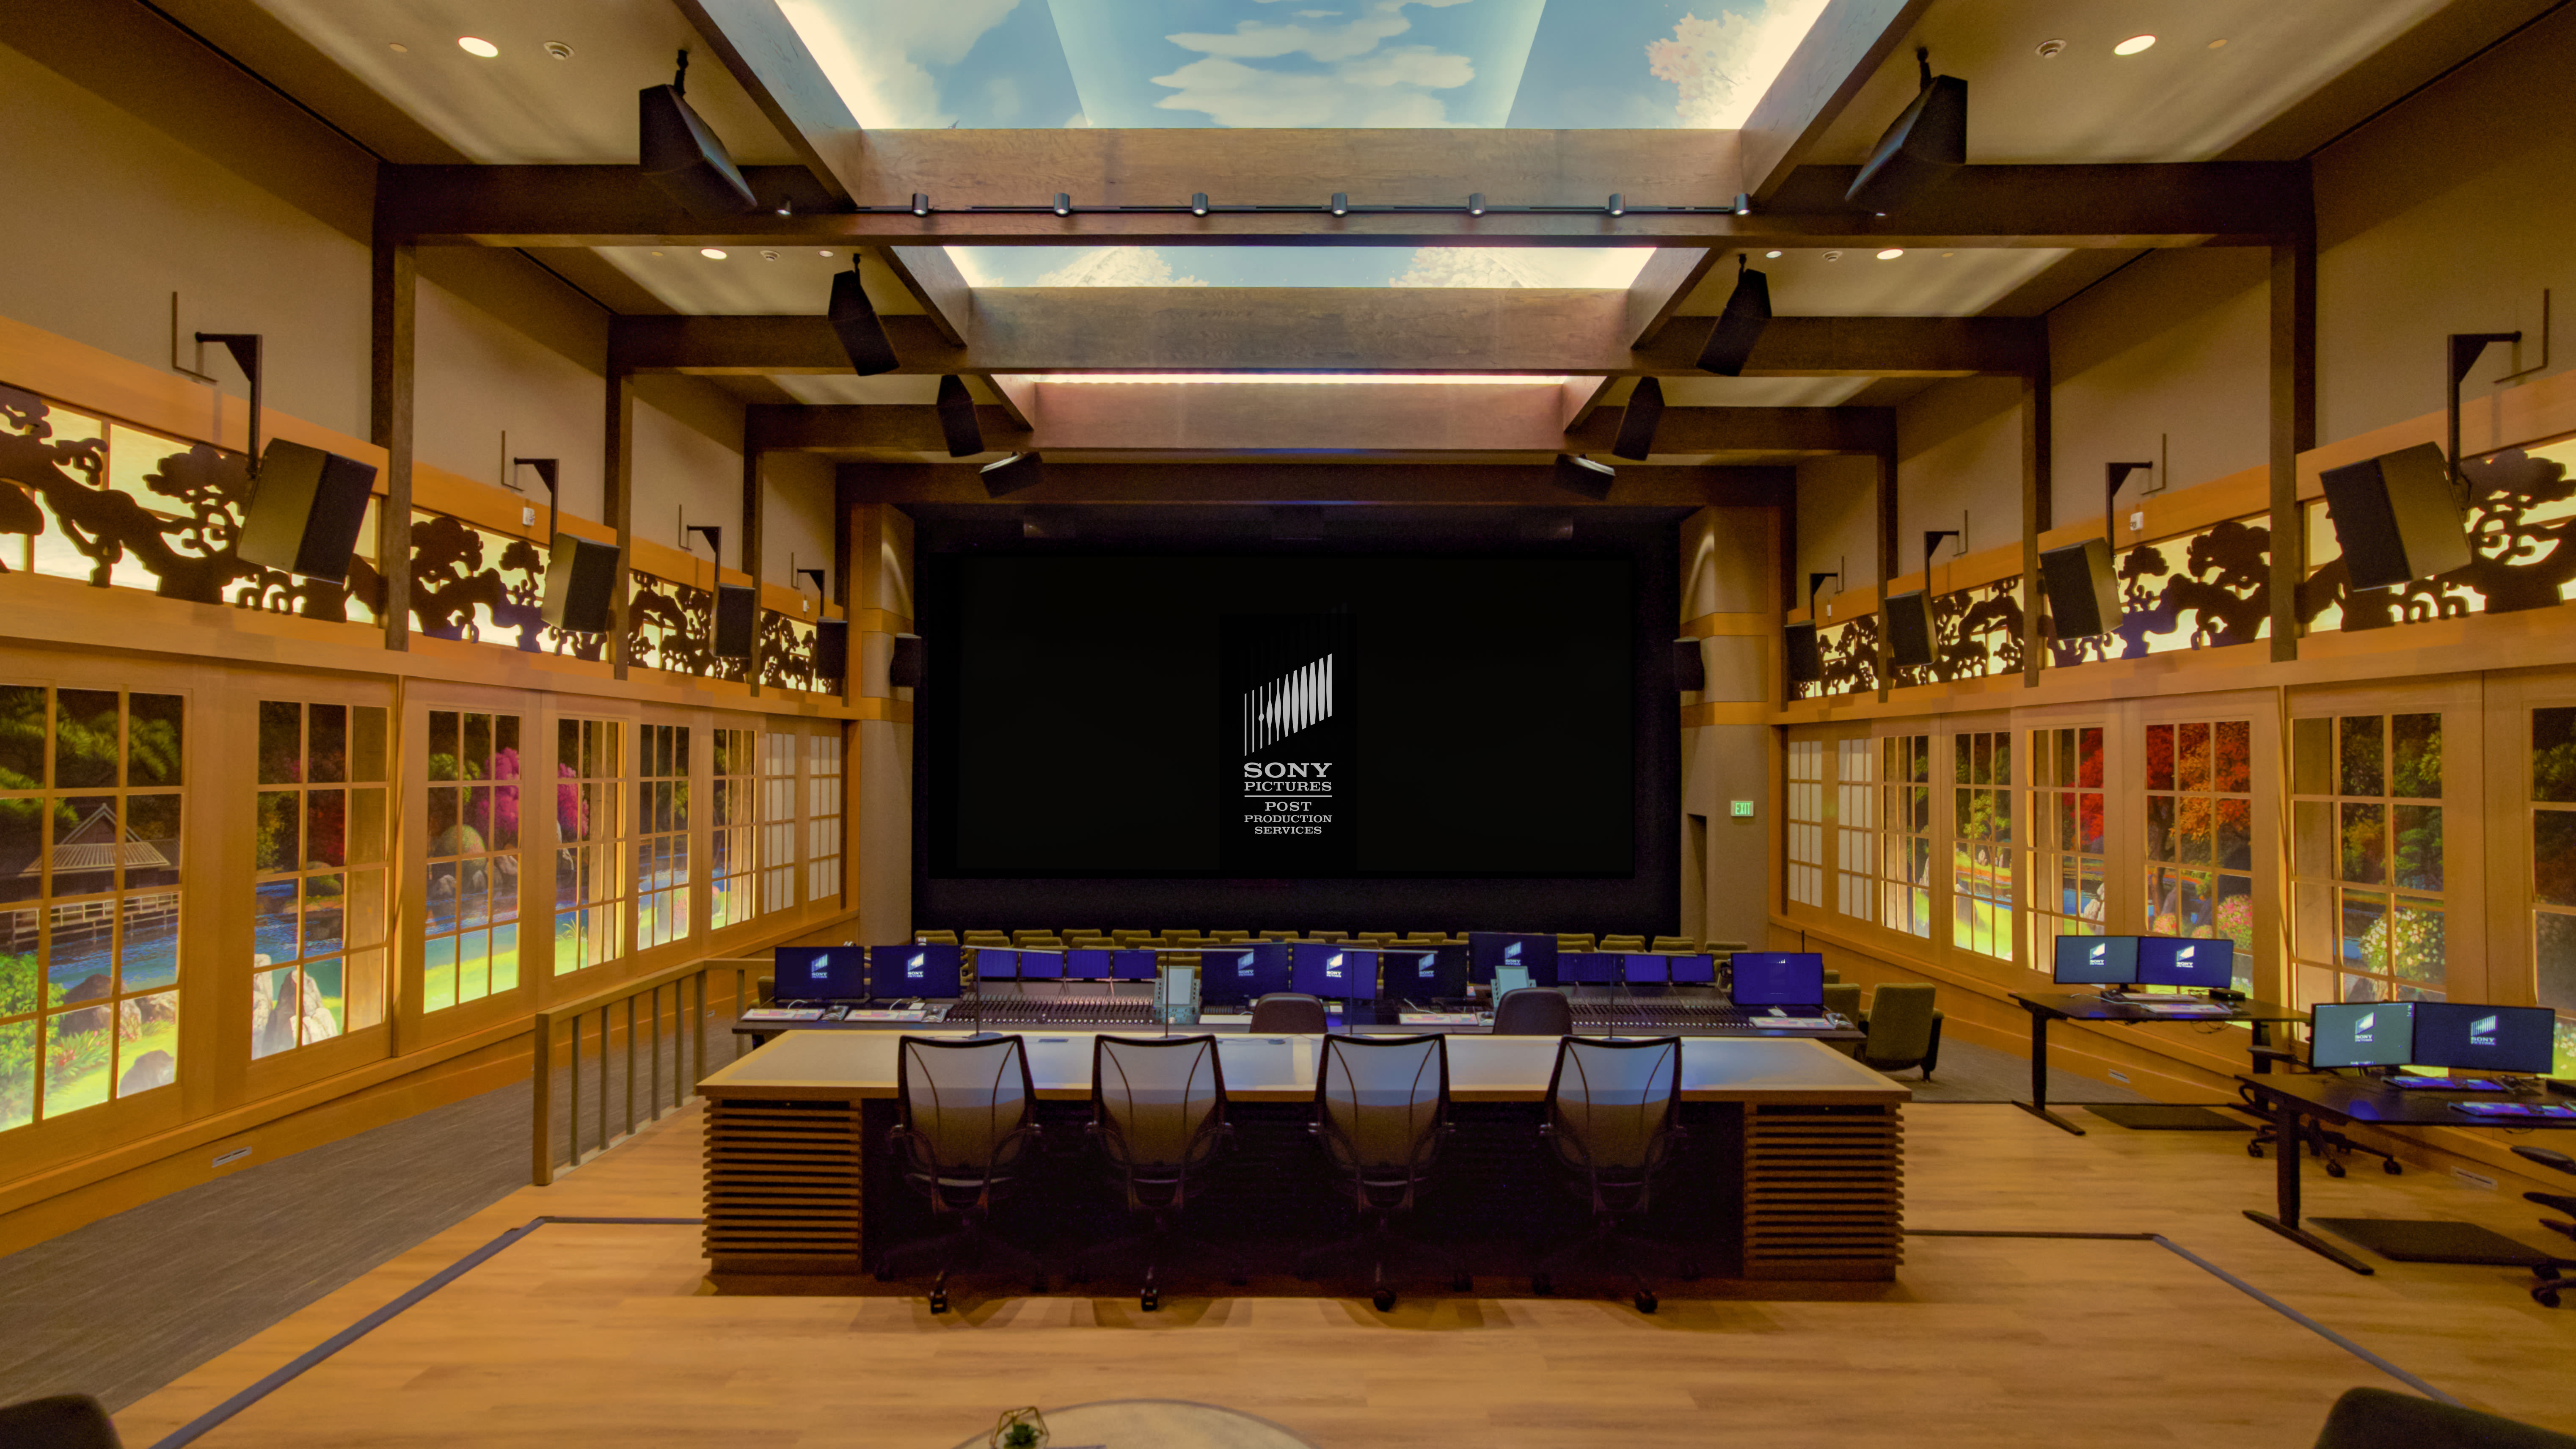 Sony Pictures Post Production Services Completes Sound Facilities Expansion